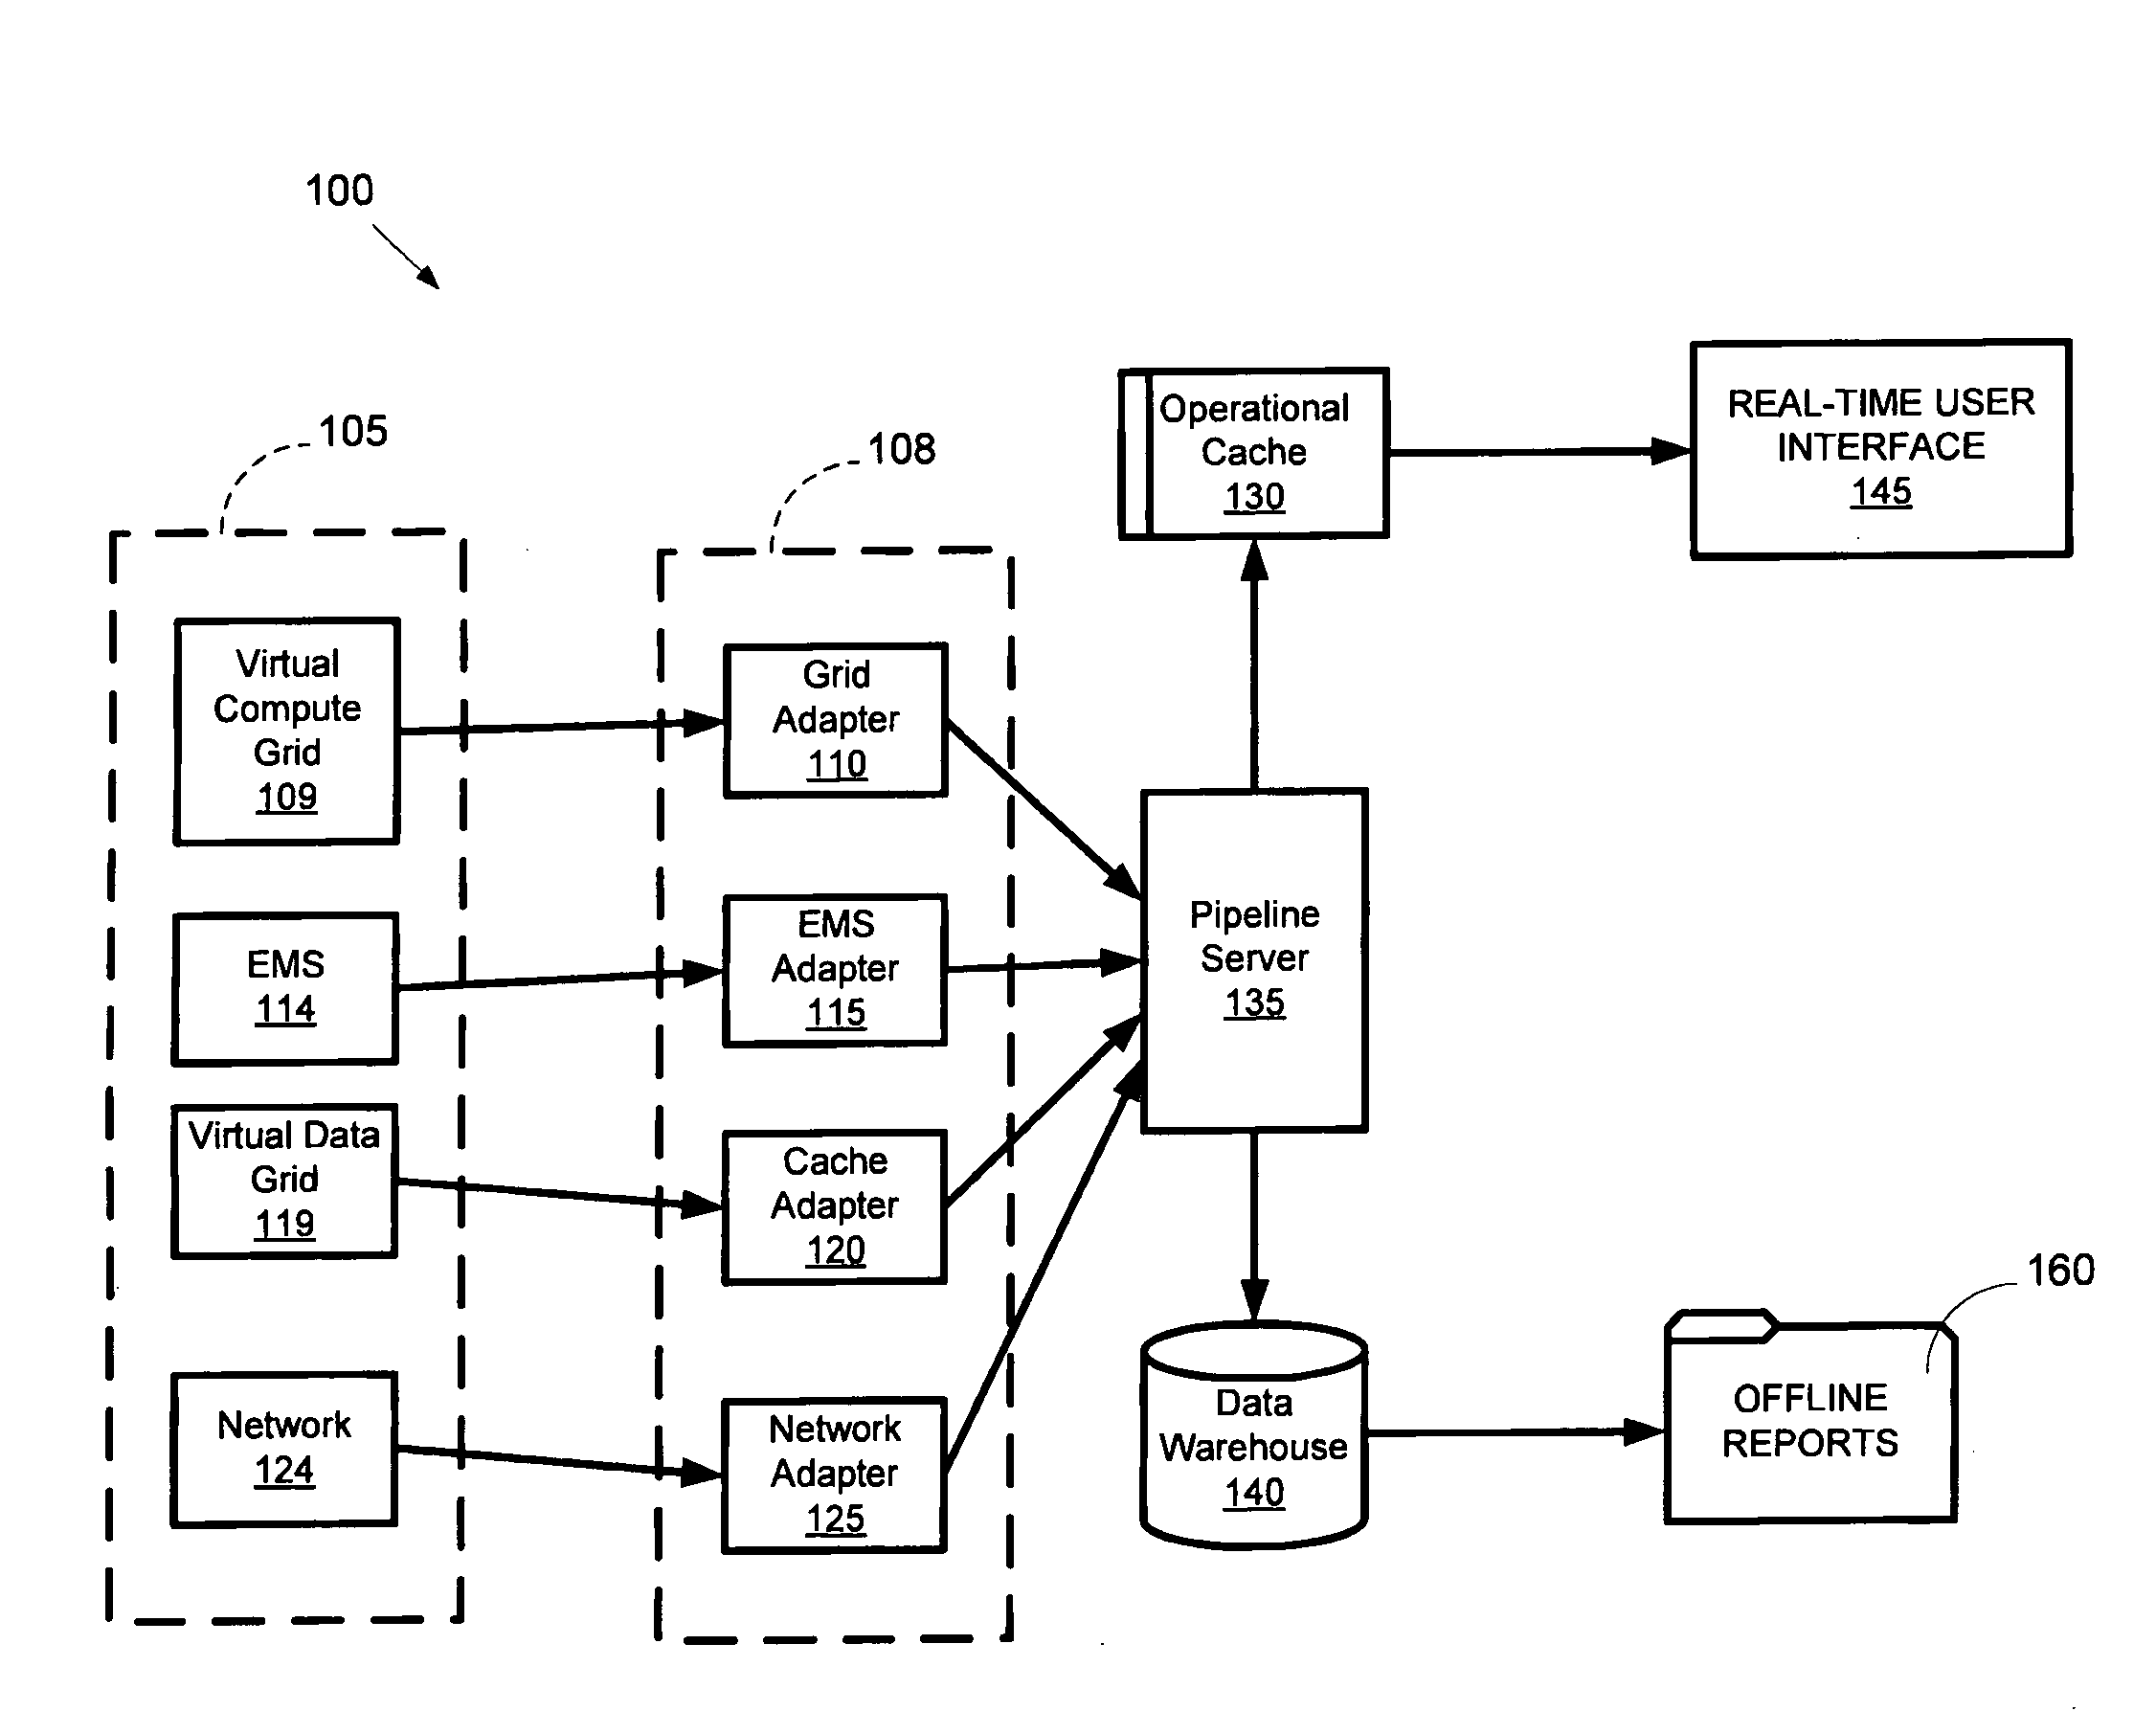 System and method for metering and analyzing usage and performance data of a virtualized compute and network infrastructure